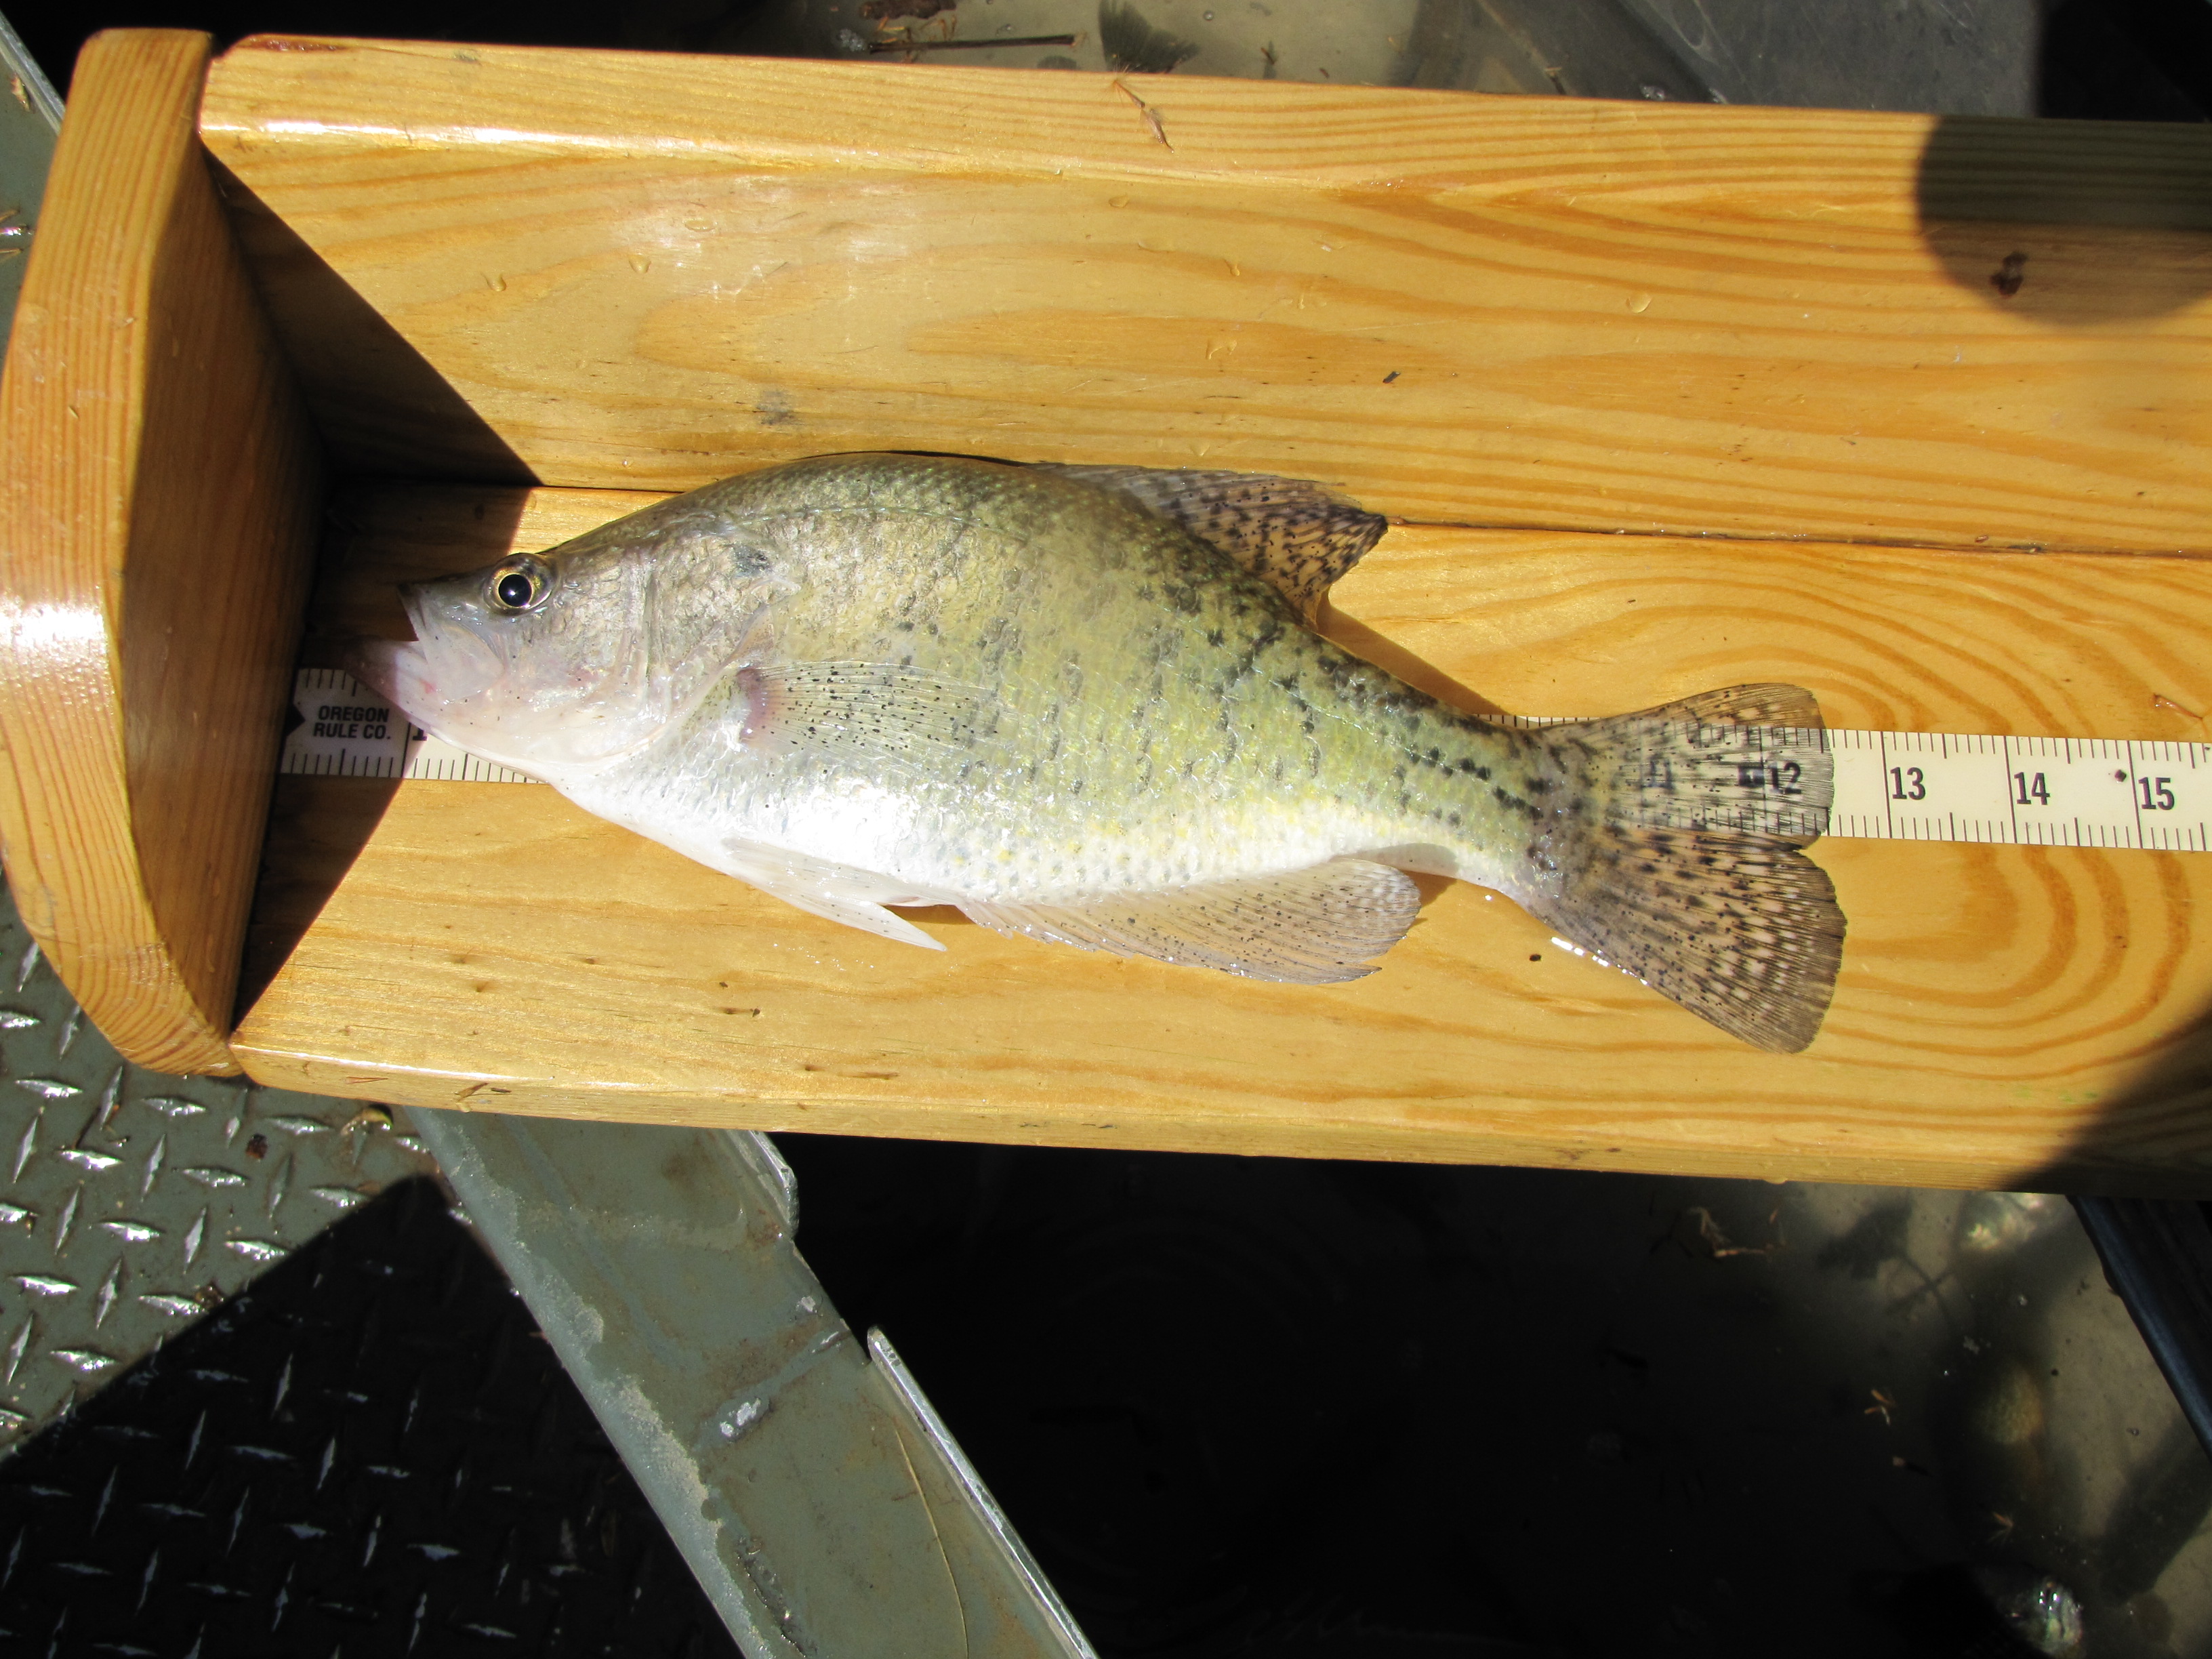 Although in low numbers, some quality crappie can be found in the slower pools of the South Fork Licking River.